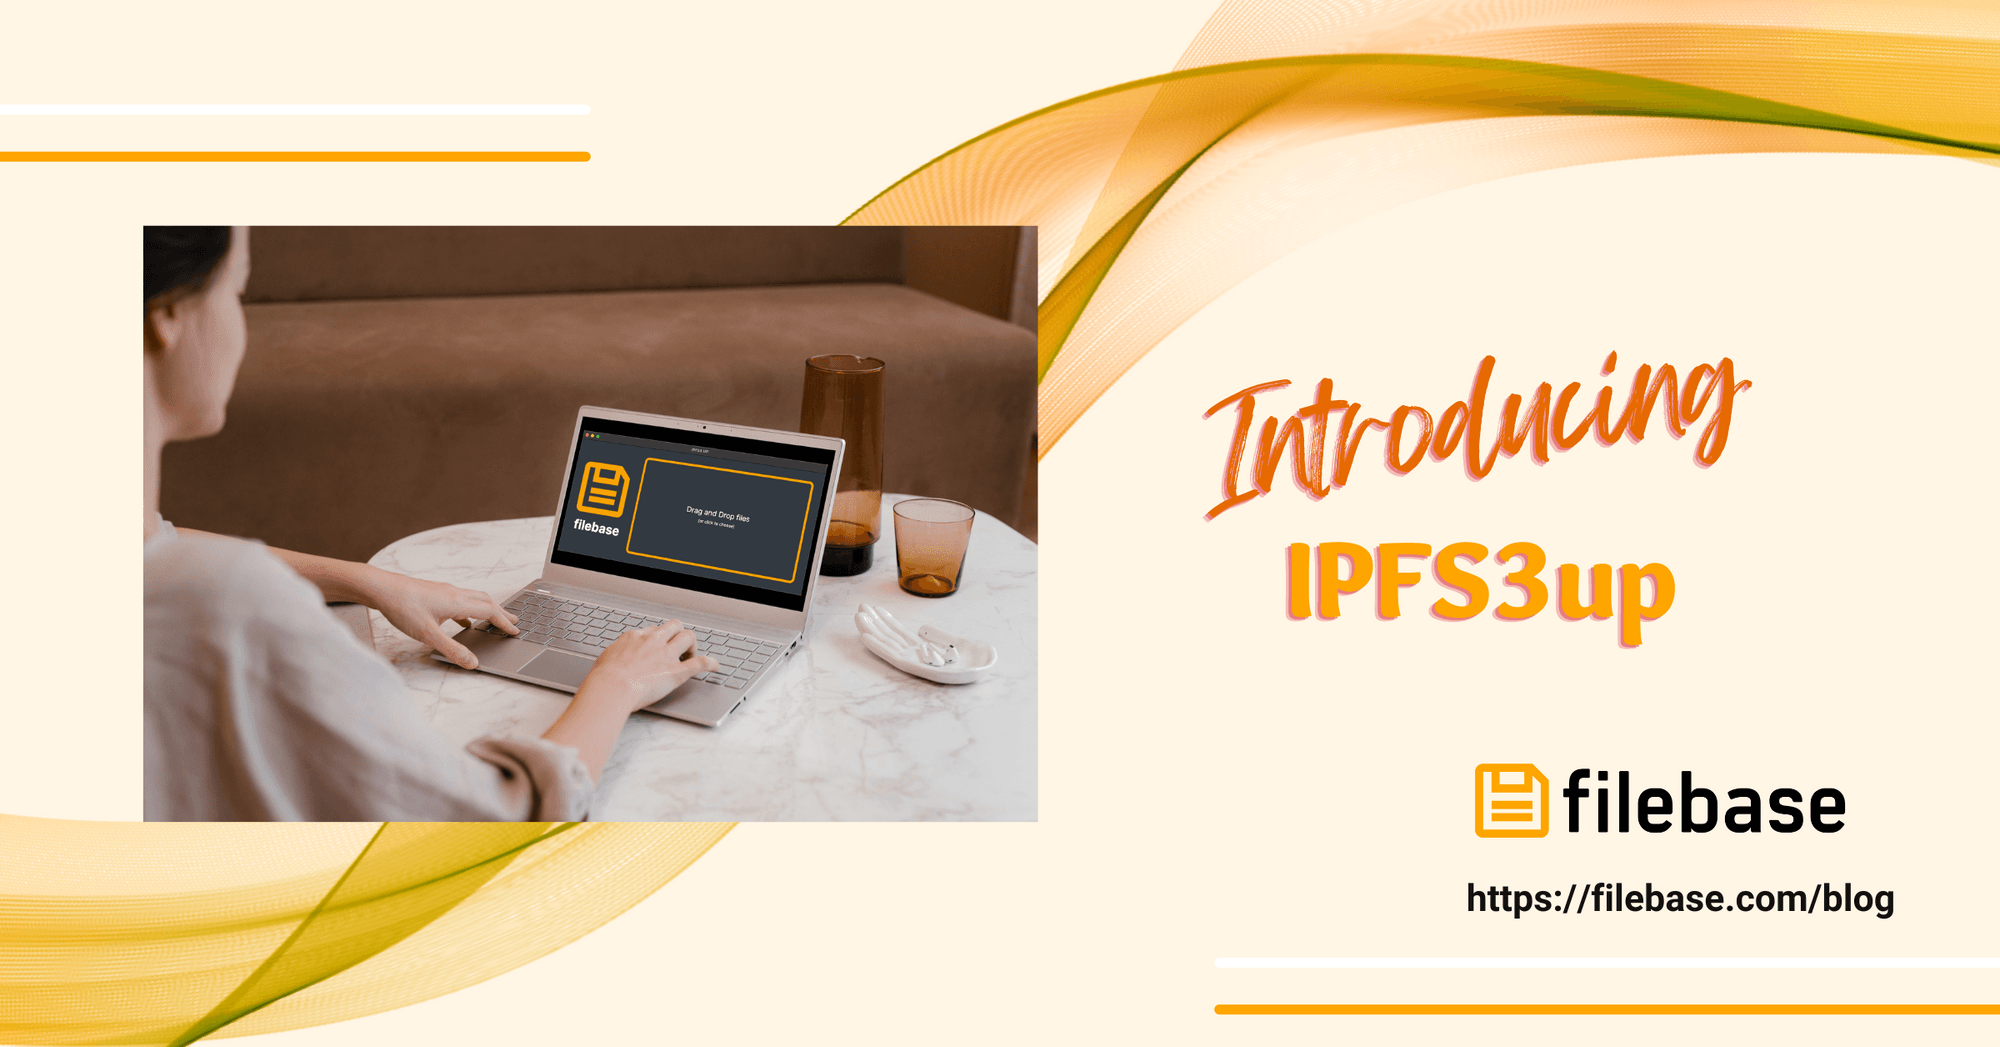 Introducing IPFS3up!